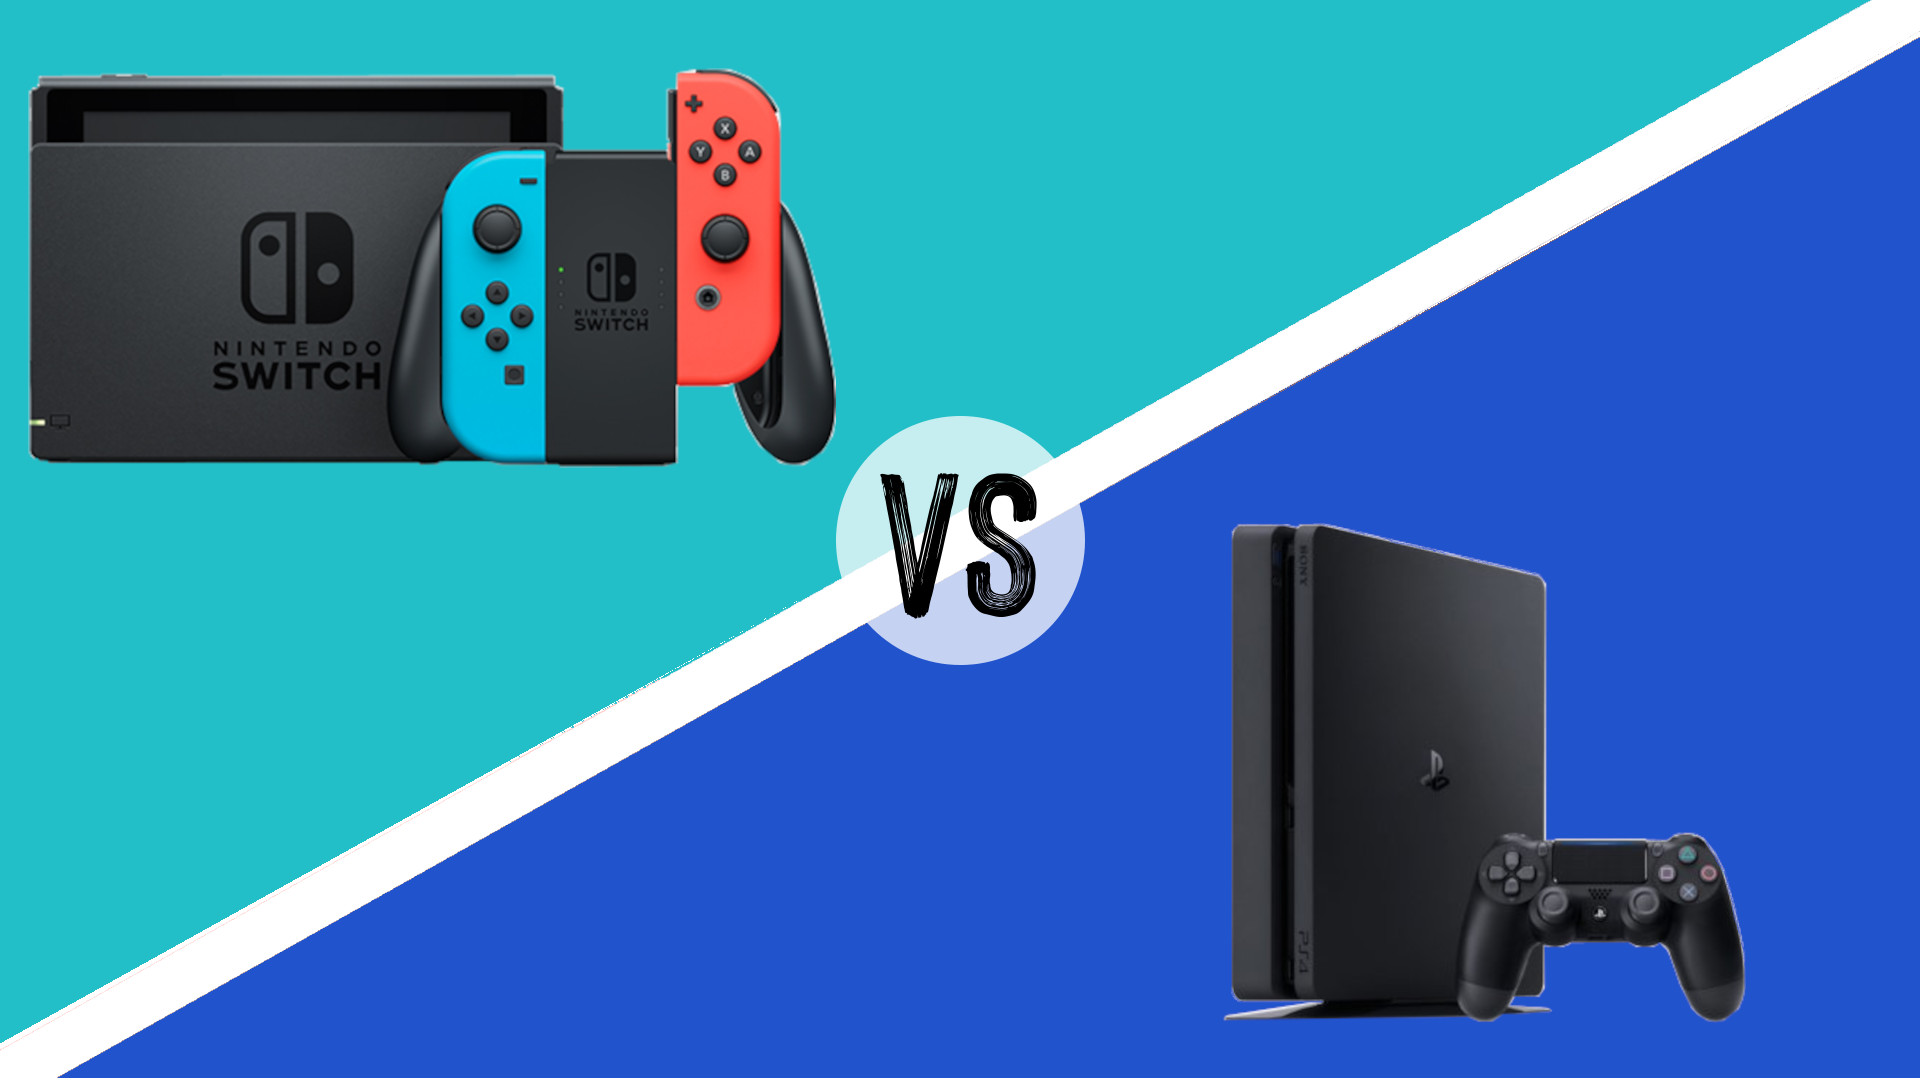 Nintendo Switch PS4: Which should you buy? | Bloq